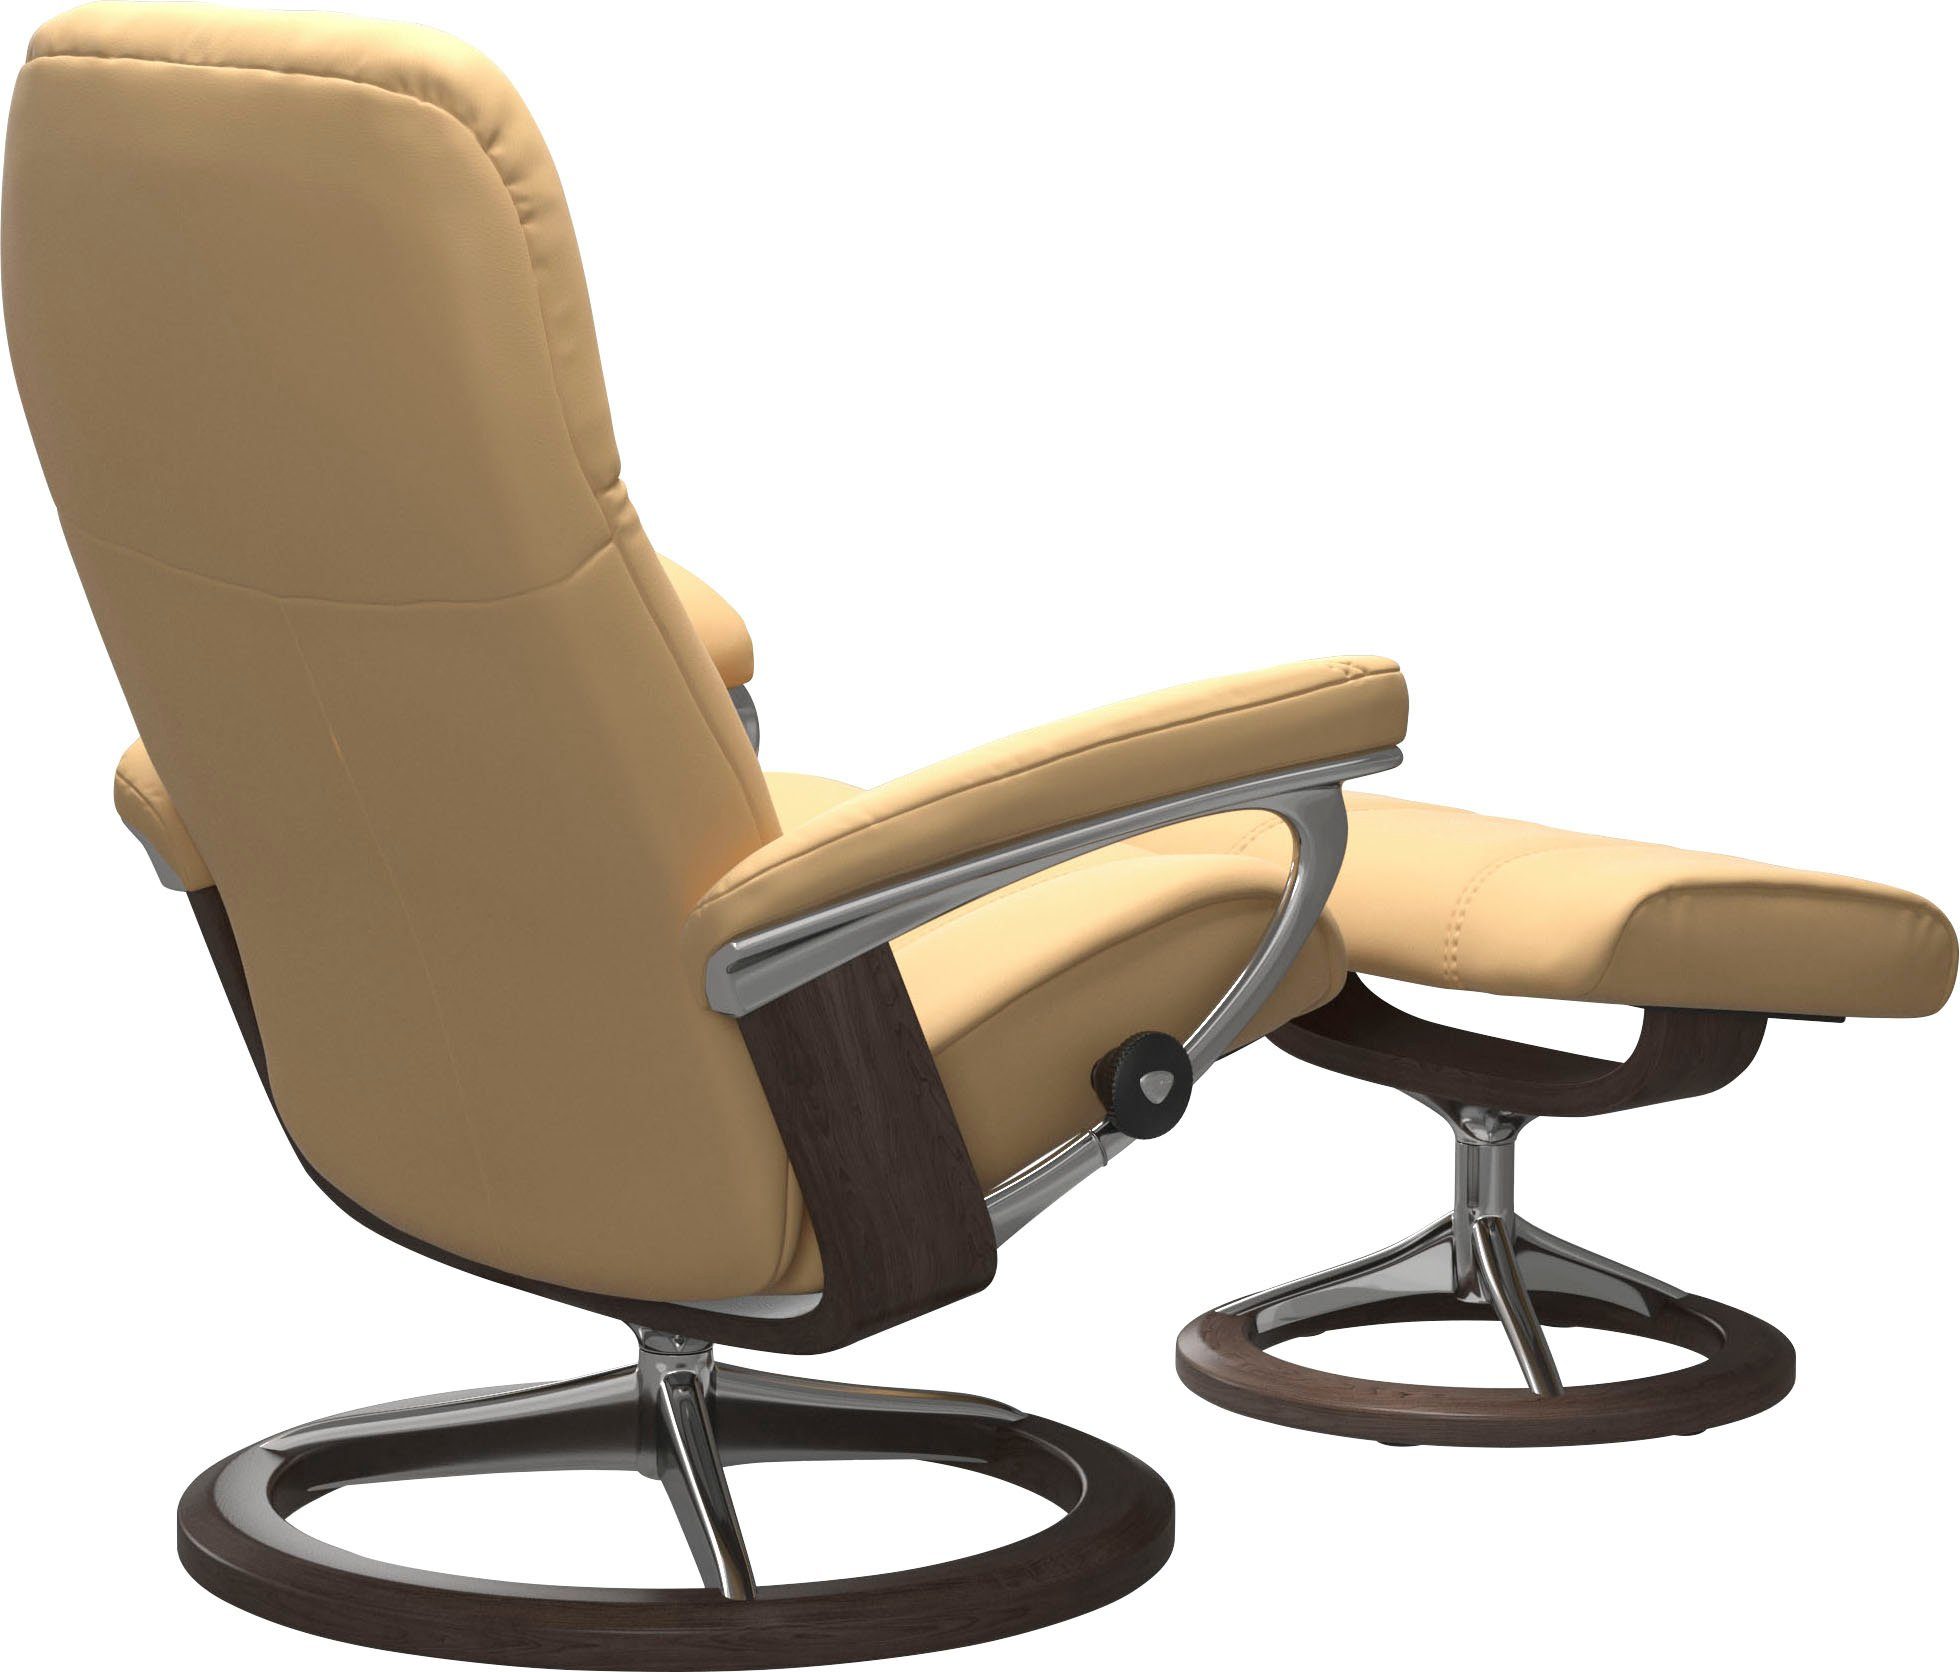 Stressless® Relaxsessel Consul, Größe Gestell Base, mit Wenge S, Signature